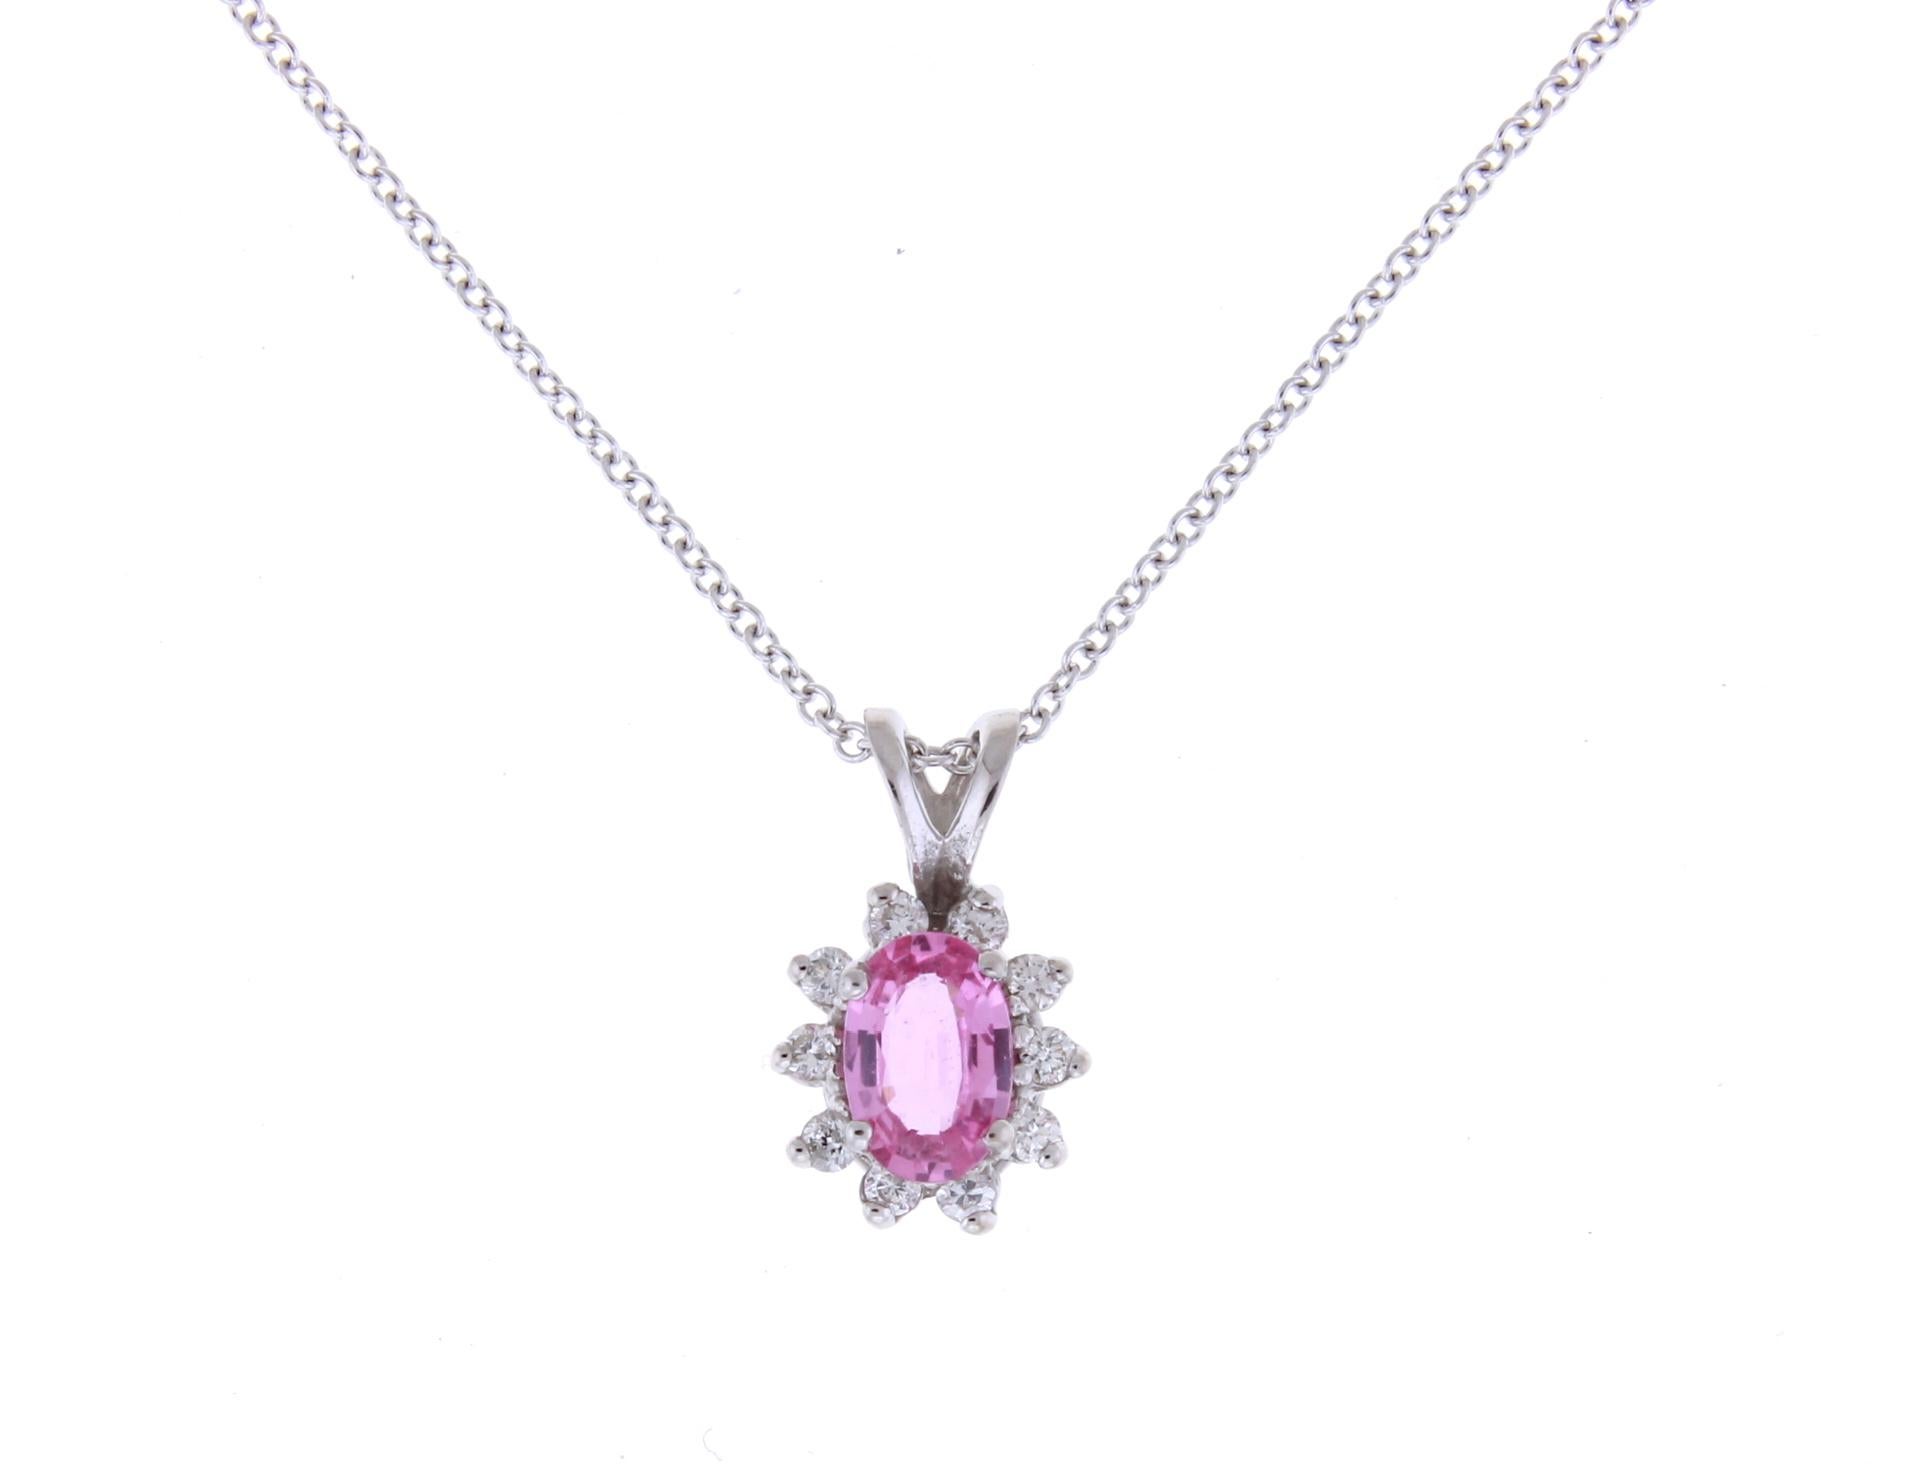 Material: 14k White Gold 
Center Stone Details: 0.5 Carat Oval Pink Sapphire 6 x 4 mm
Mounting Diamond Details: 10 Round White Diamonds Approximately 0.12 Carats - Clarity: SI / Color: H-I
Chain: 18 inch

Match this with our 0.57 Carat Oval Pink